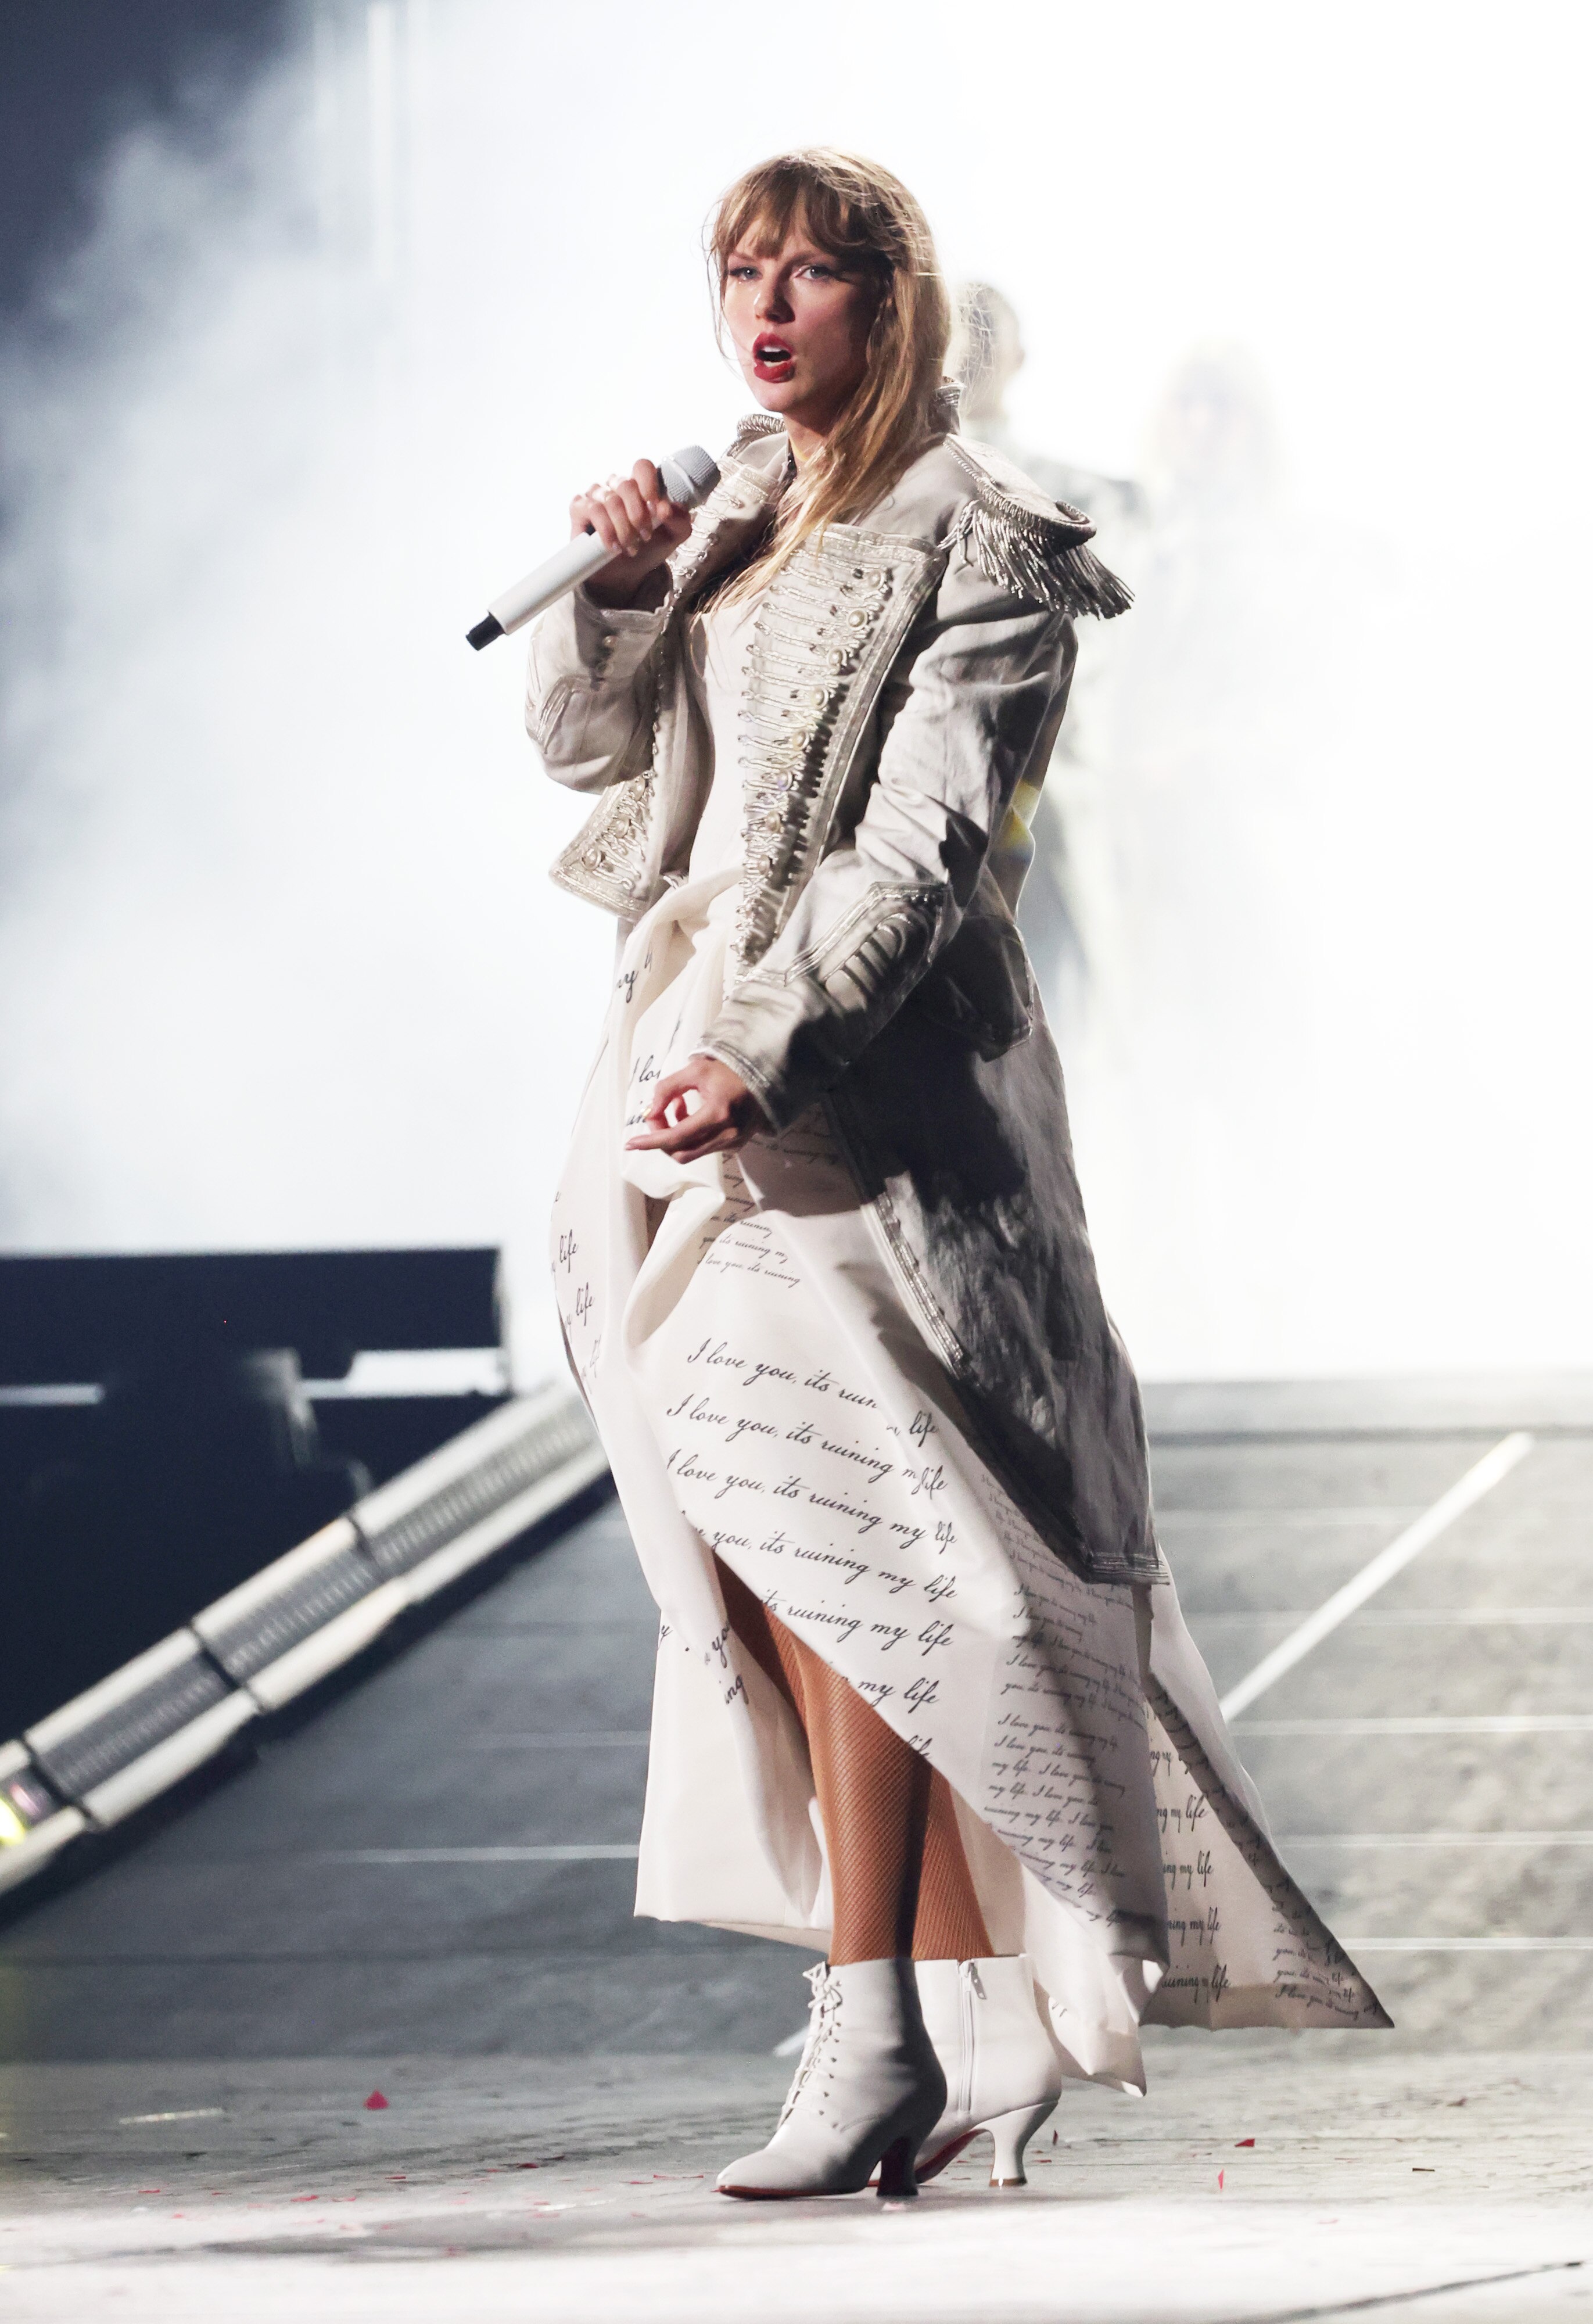 Talyor Swift singing in a white dress and a white leather military jacket 